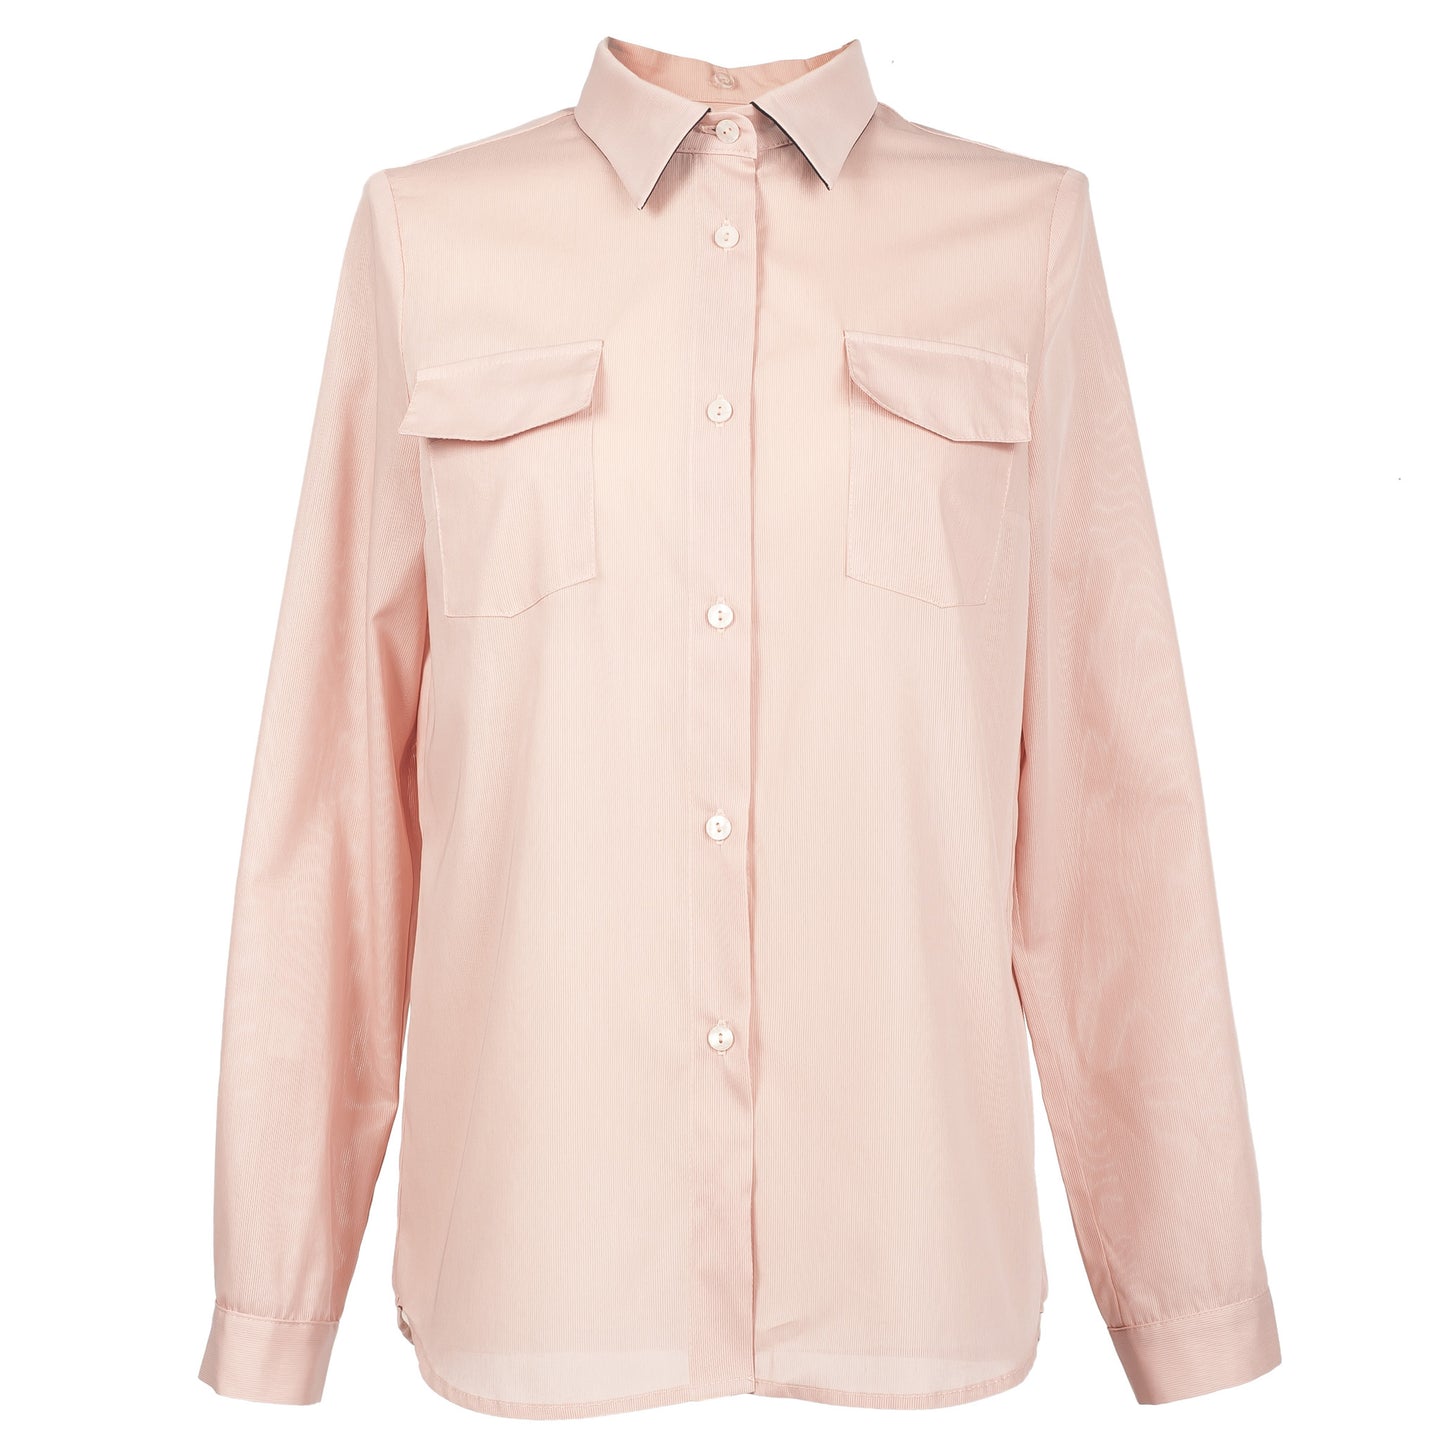 Casual blouse pink - Last size: 44